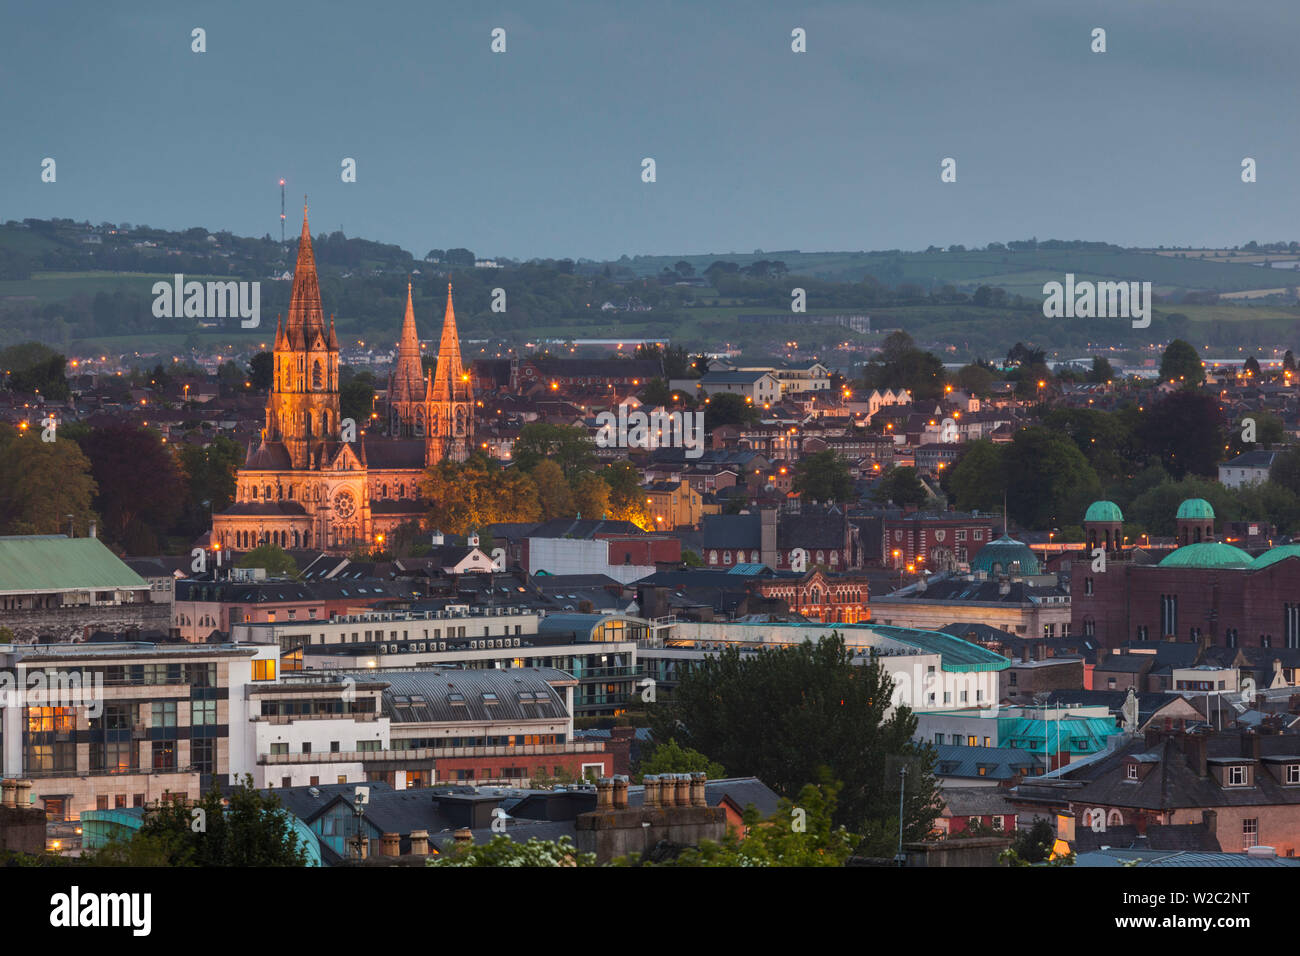 Ireland, County Cork, Cork City, St. Fin Barre's Cathedral, 19th century, elevated view, dusk Stock Photo